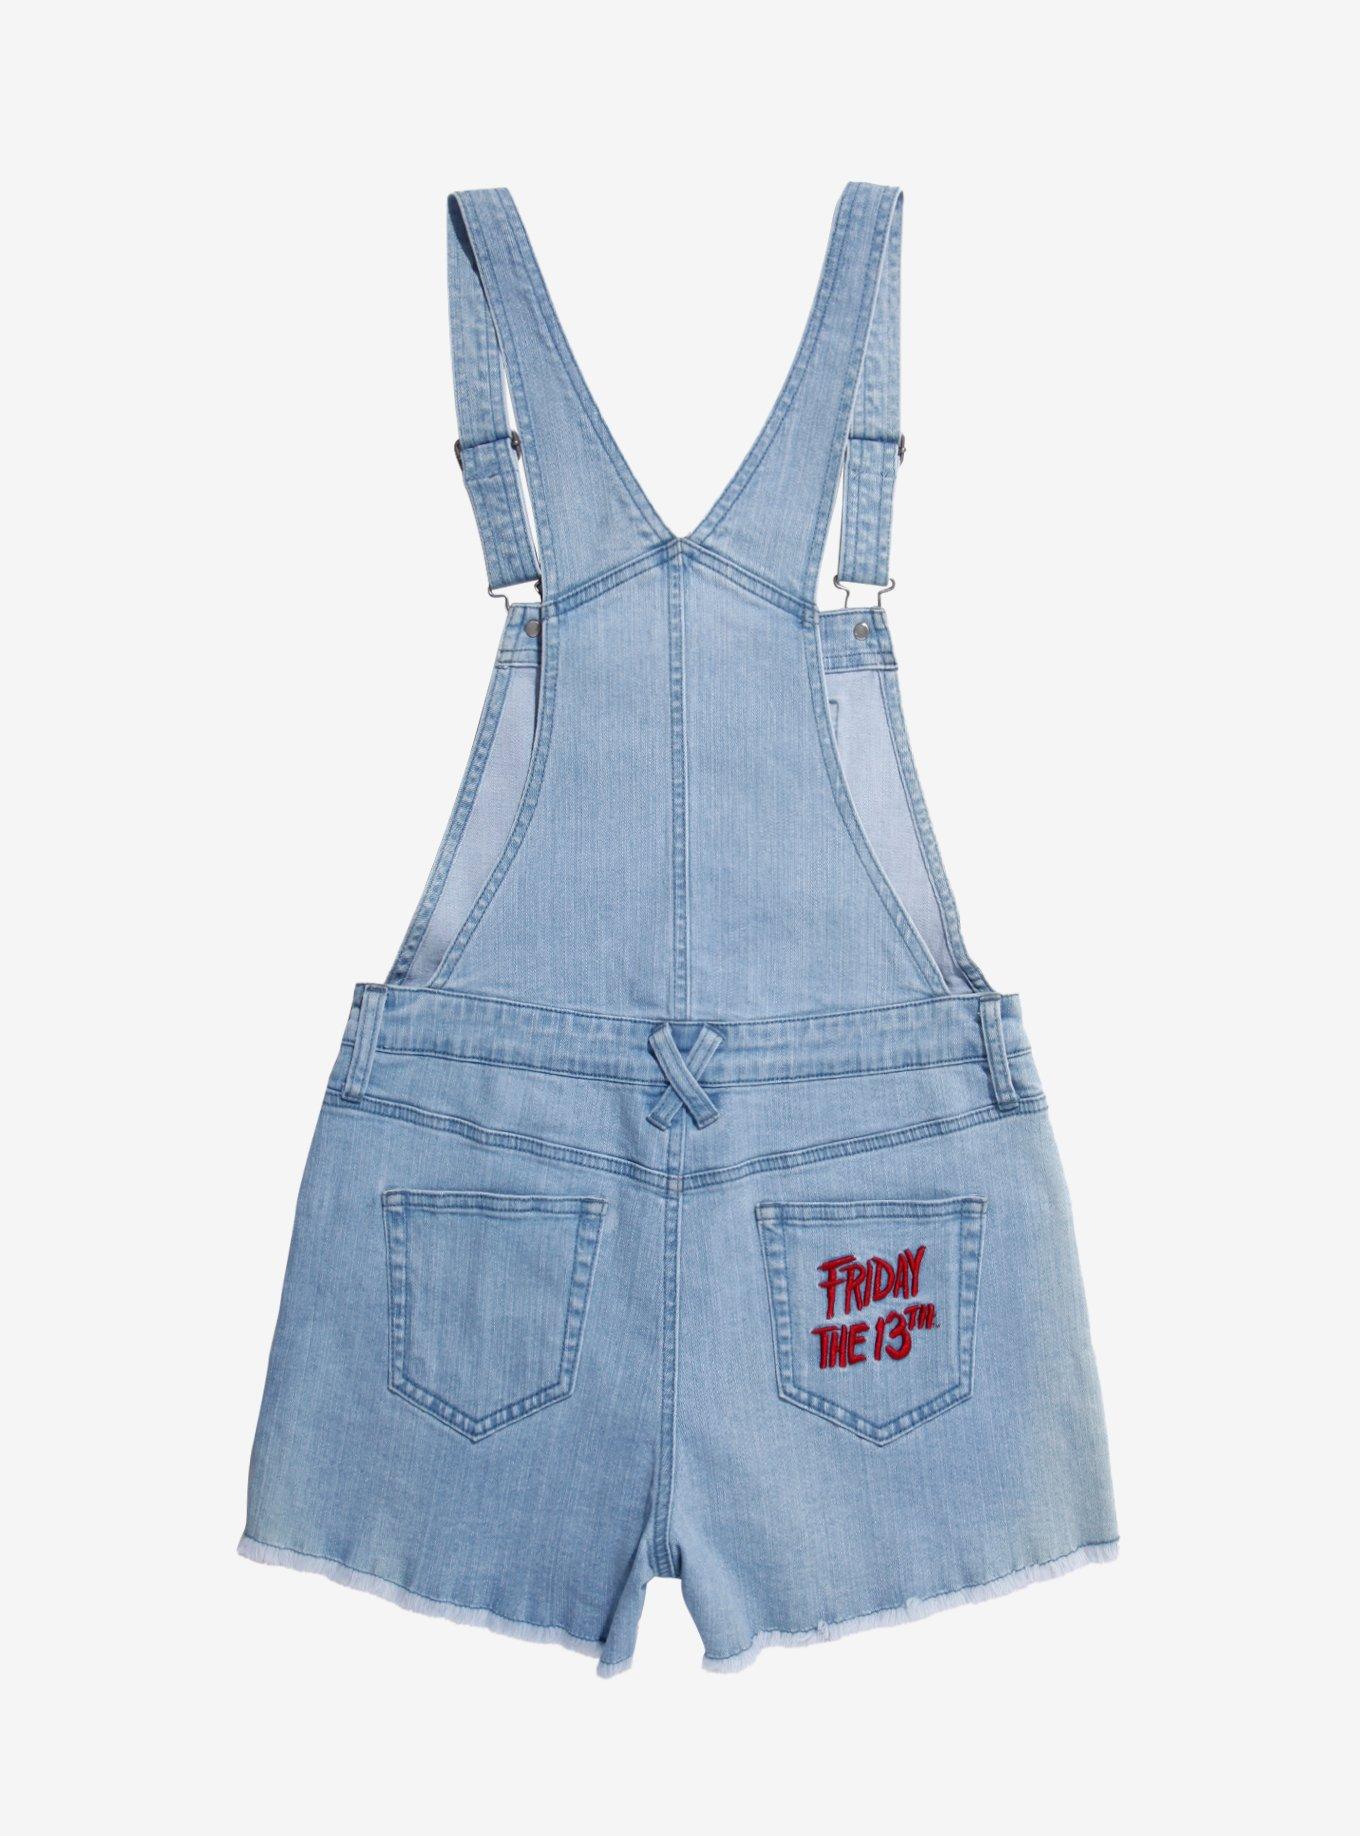 Friday The 13th Camp Crystal Lake Embroidered Shortalls Plus Size, INDIGO, alternate